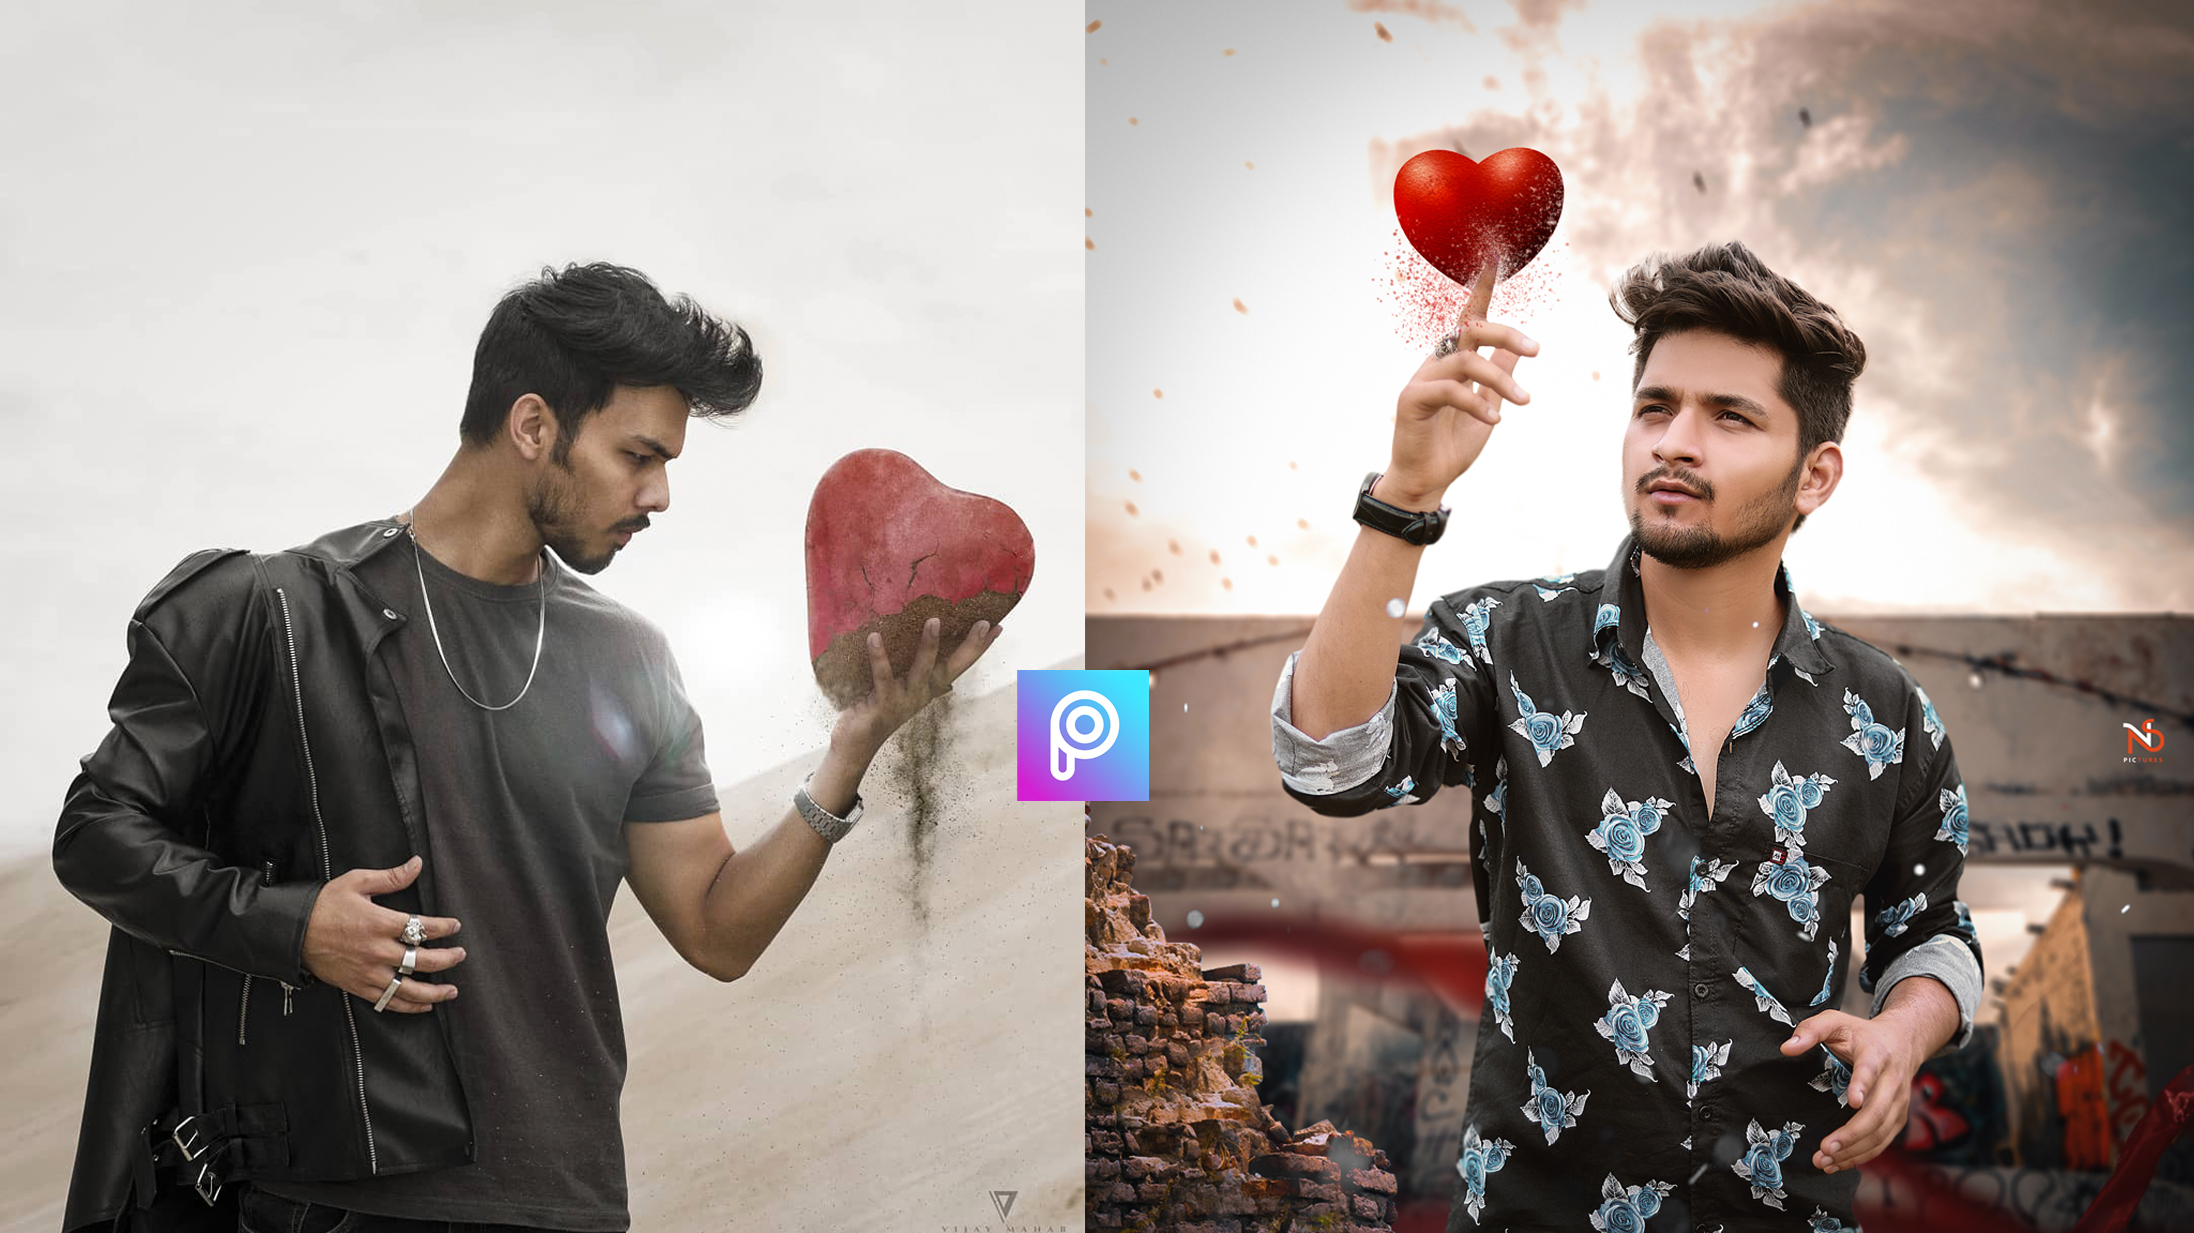 broken heart editing backgrounds and pngs download for picsart editing